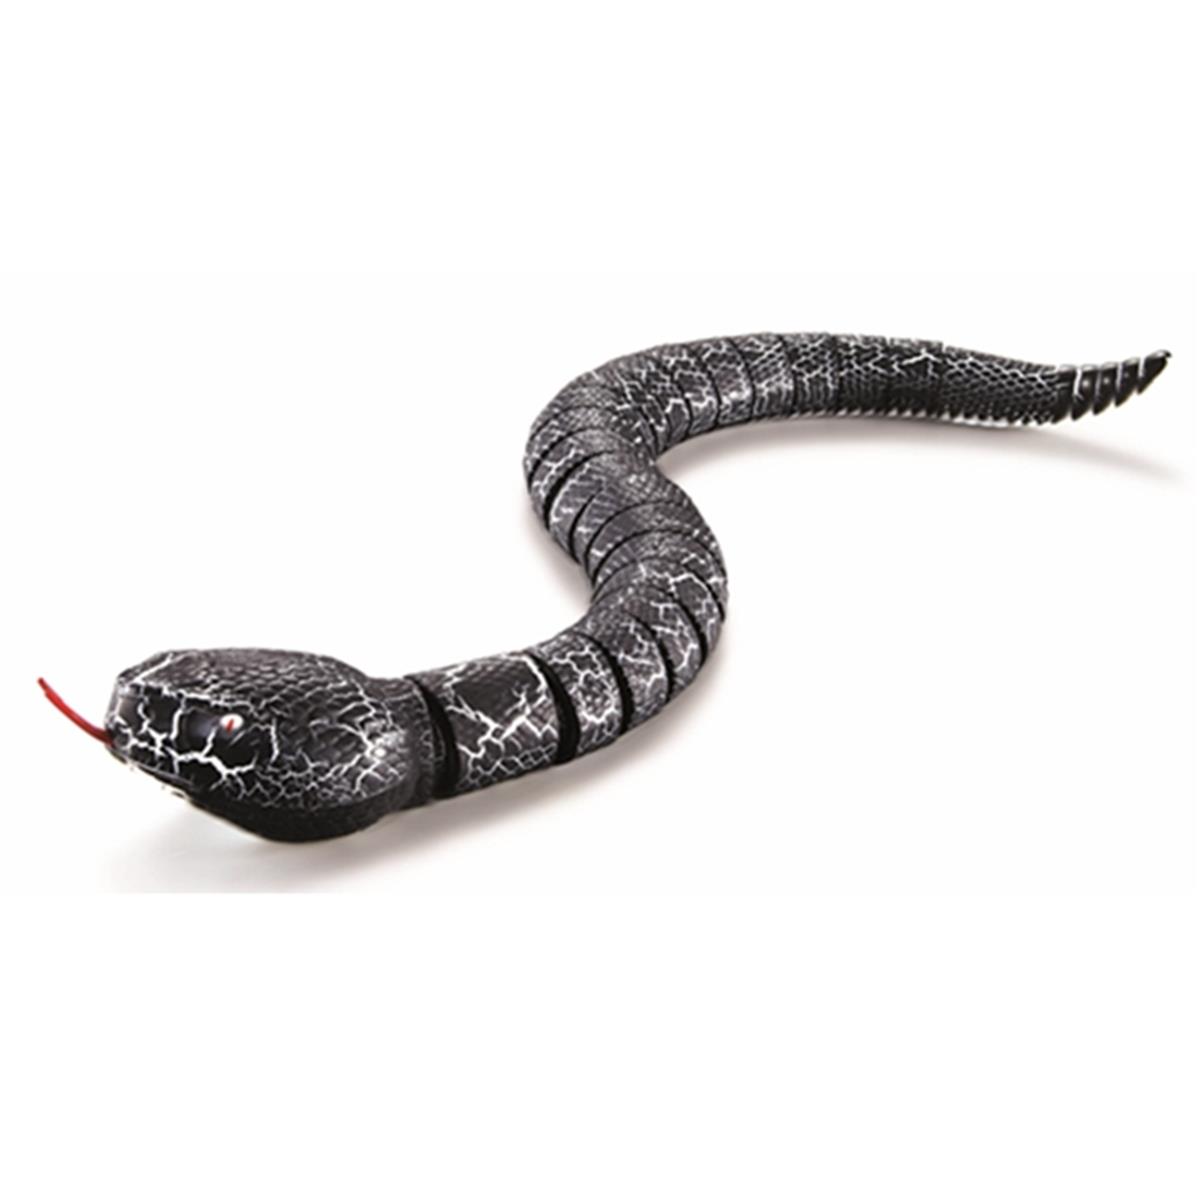 Rs9909 Black Realistic Remote Control Snake With Egg Shaped Controller - Black